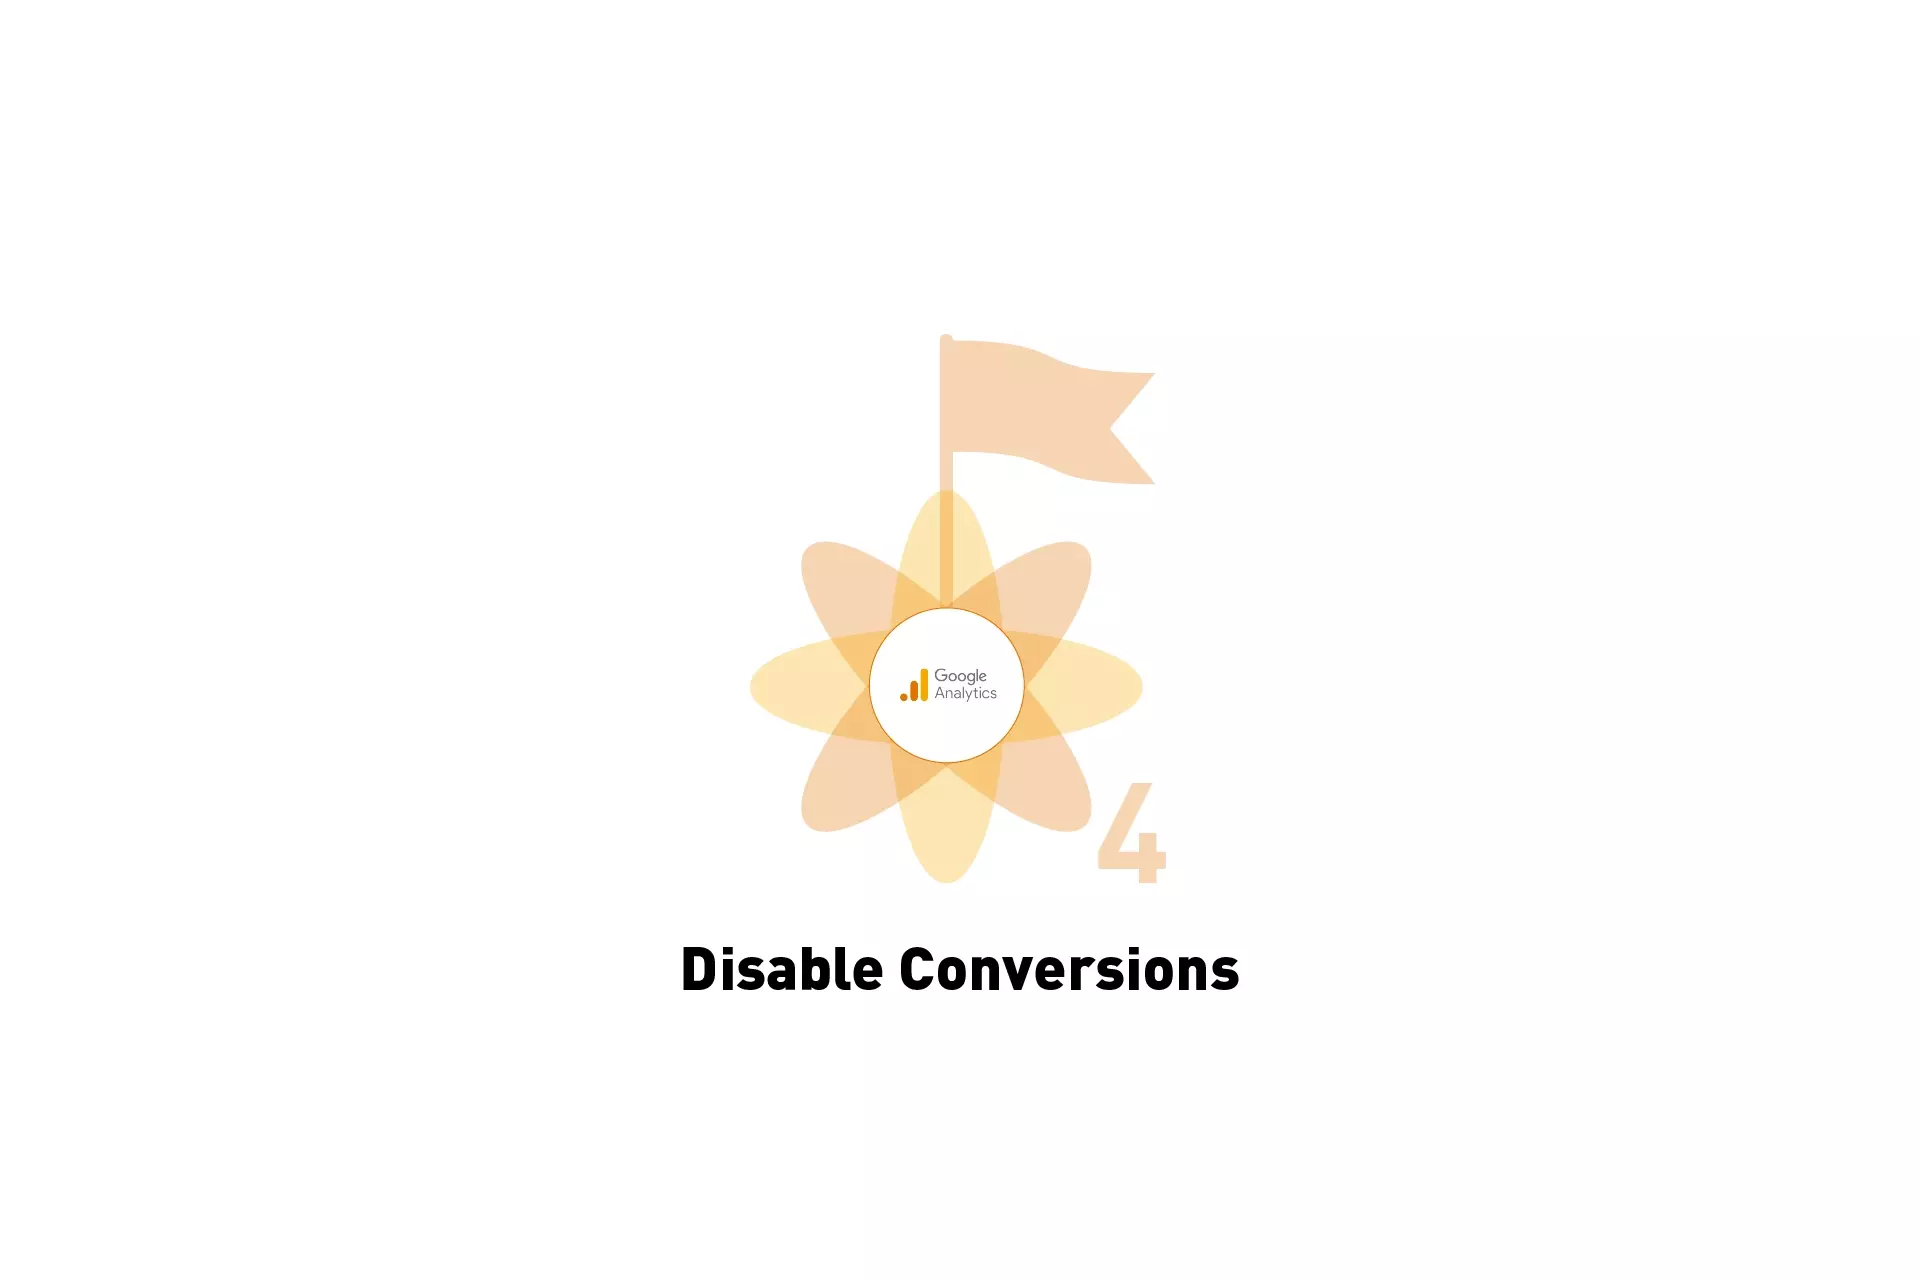 A flower that represents Google Analytics 4, with the text "Disable Conversions" beneath it.